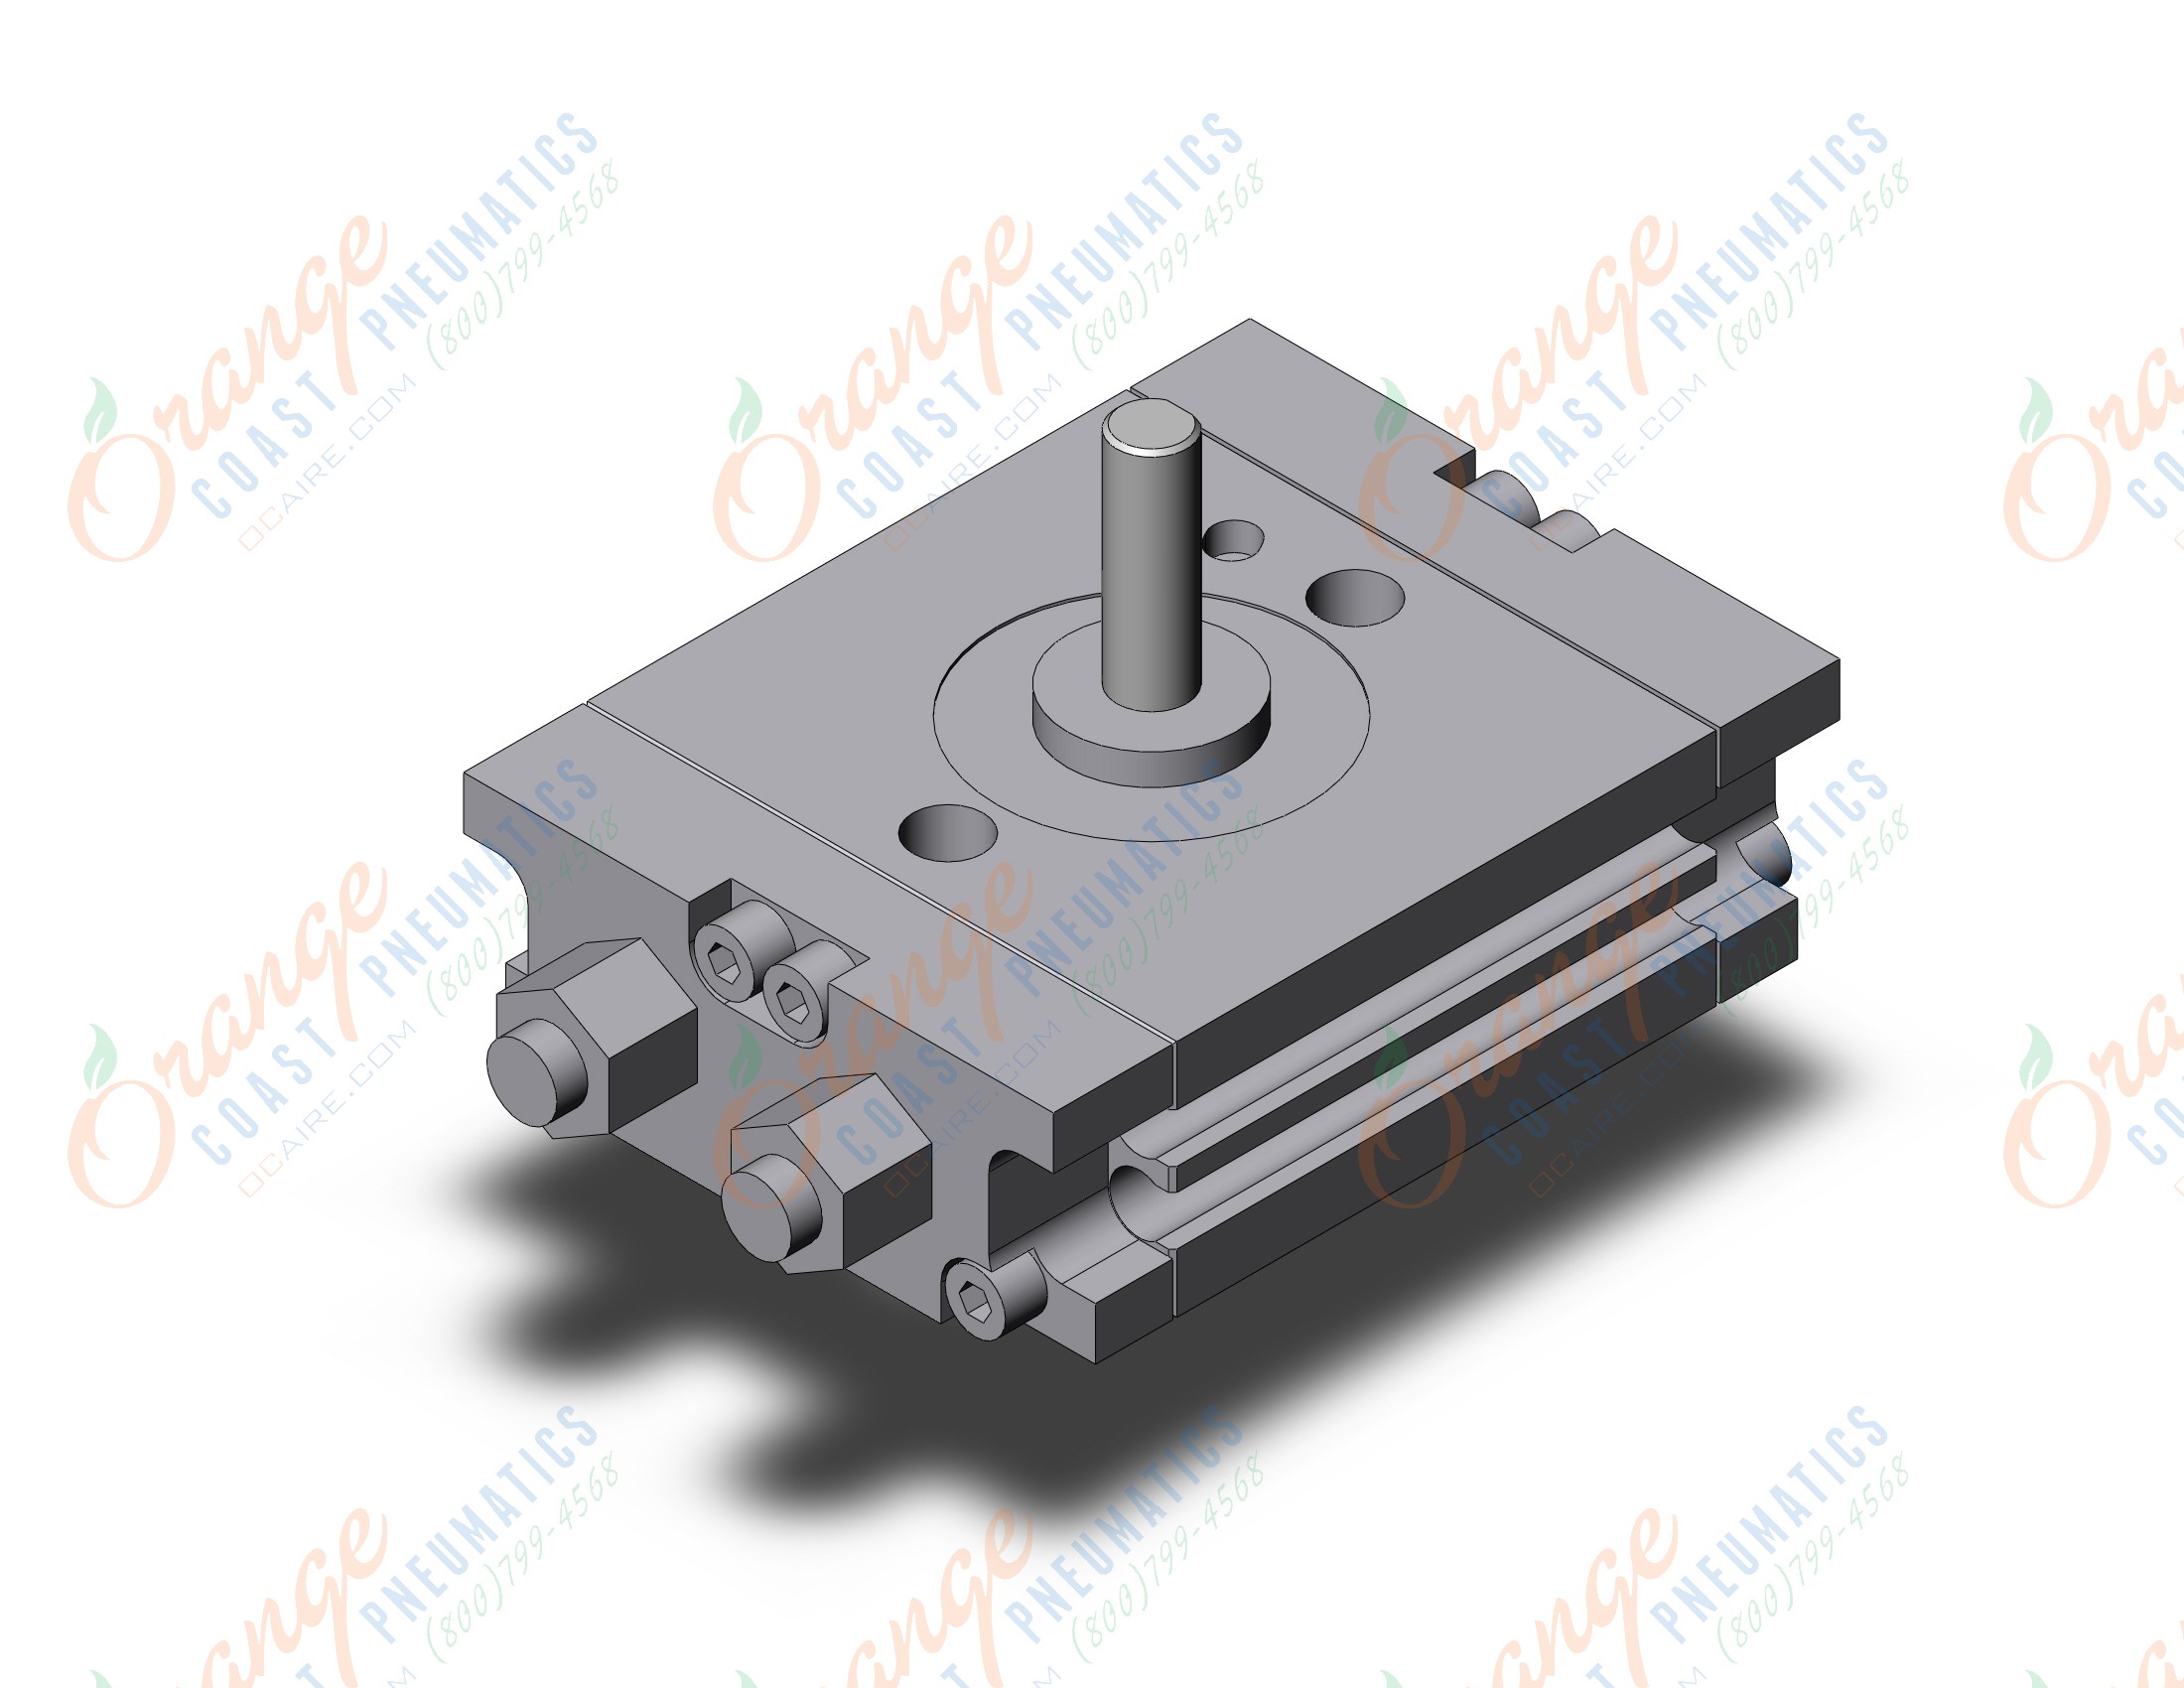 SMC CRQ2XBW10-90 cyl, low speed rotary actuator, CRQ2 ROTARY ACTUATOR